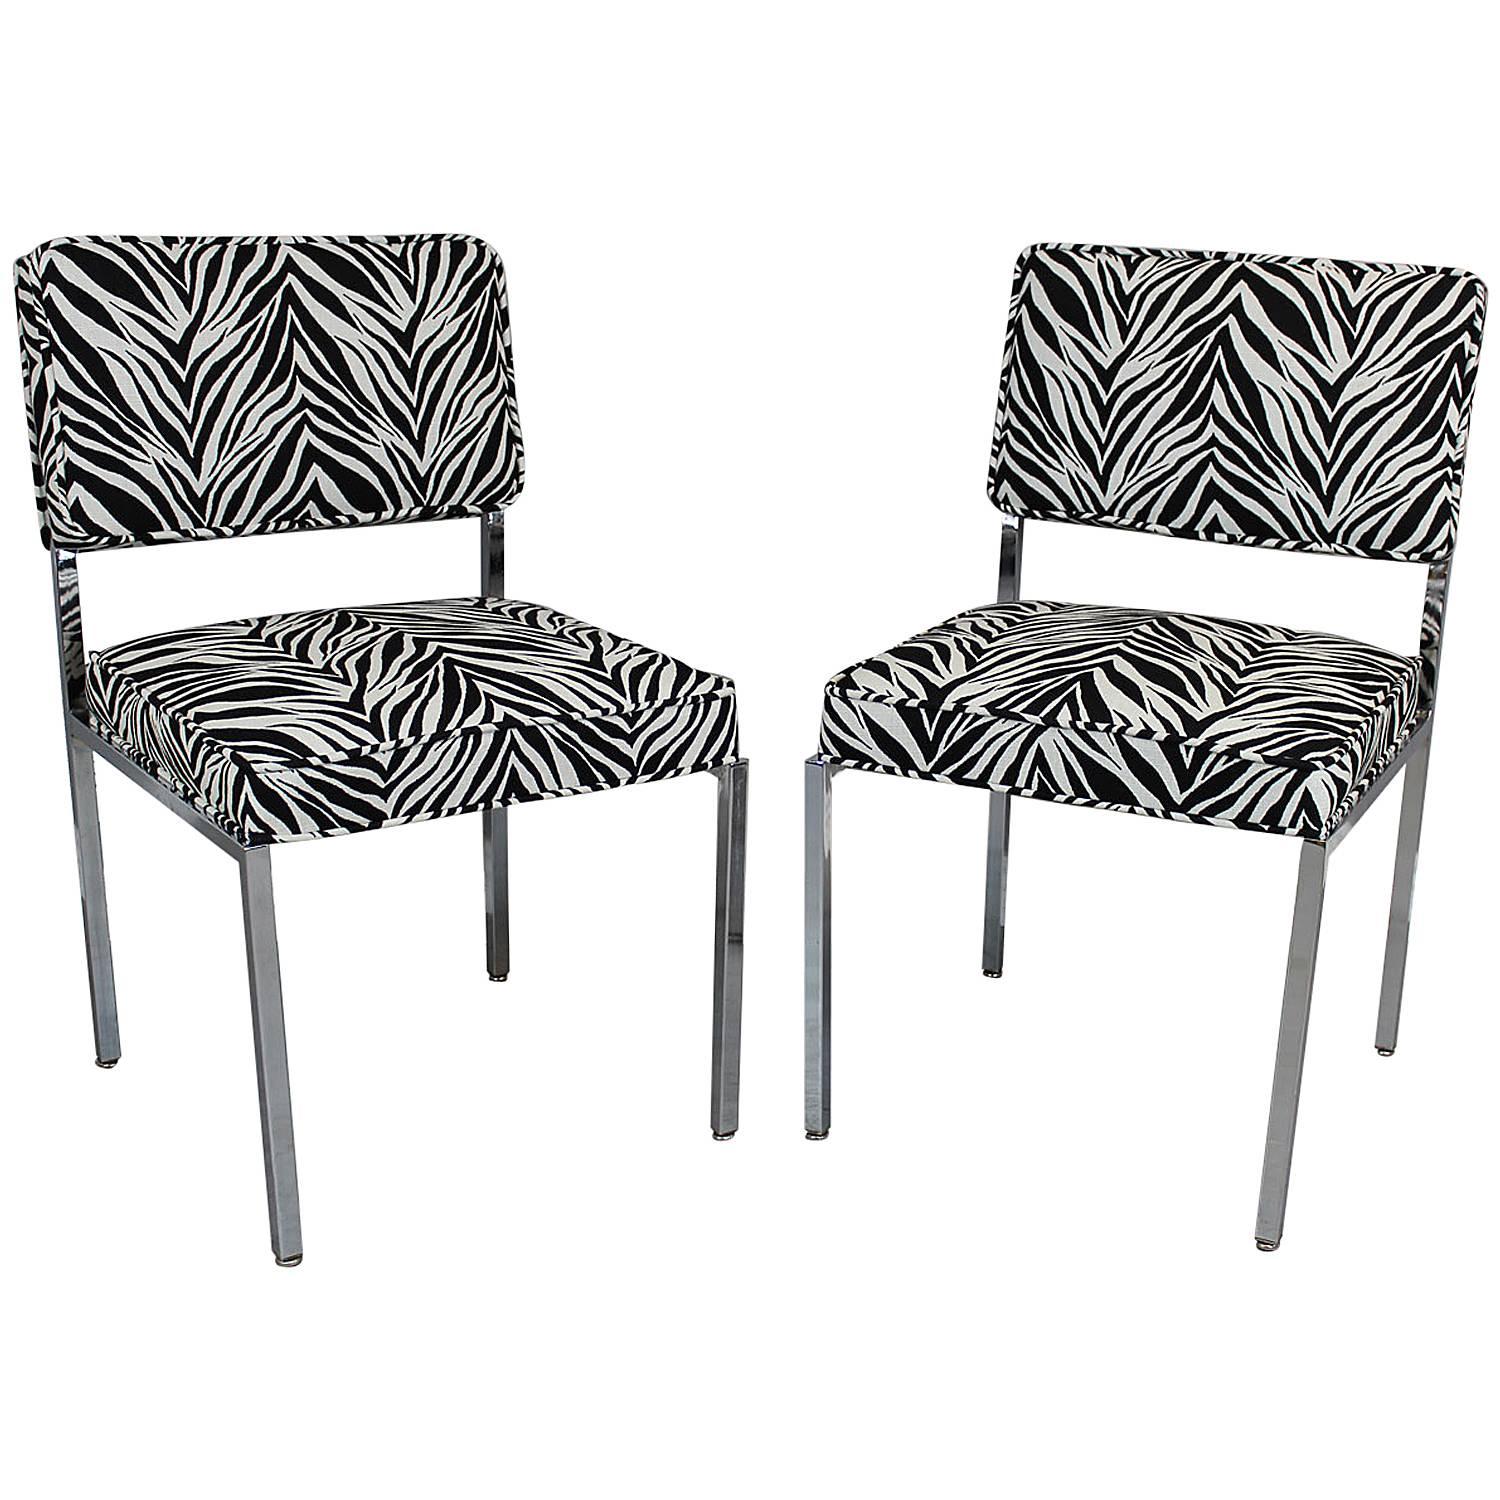 Milo Baughman Style Zebra Side Chairs, Pair For Sale